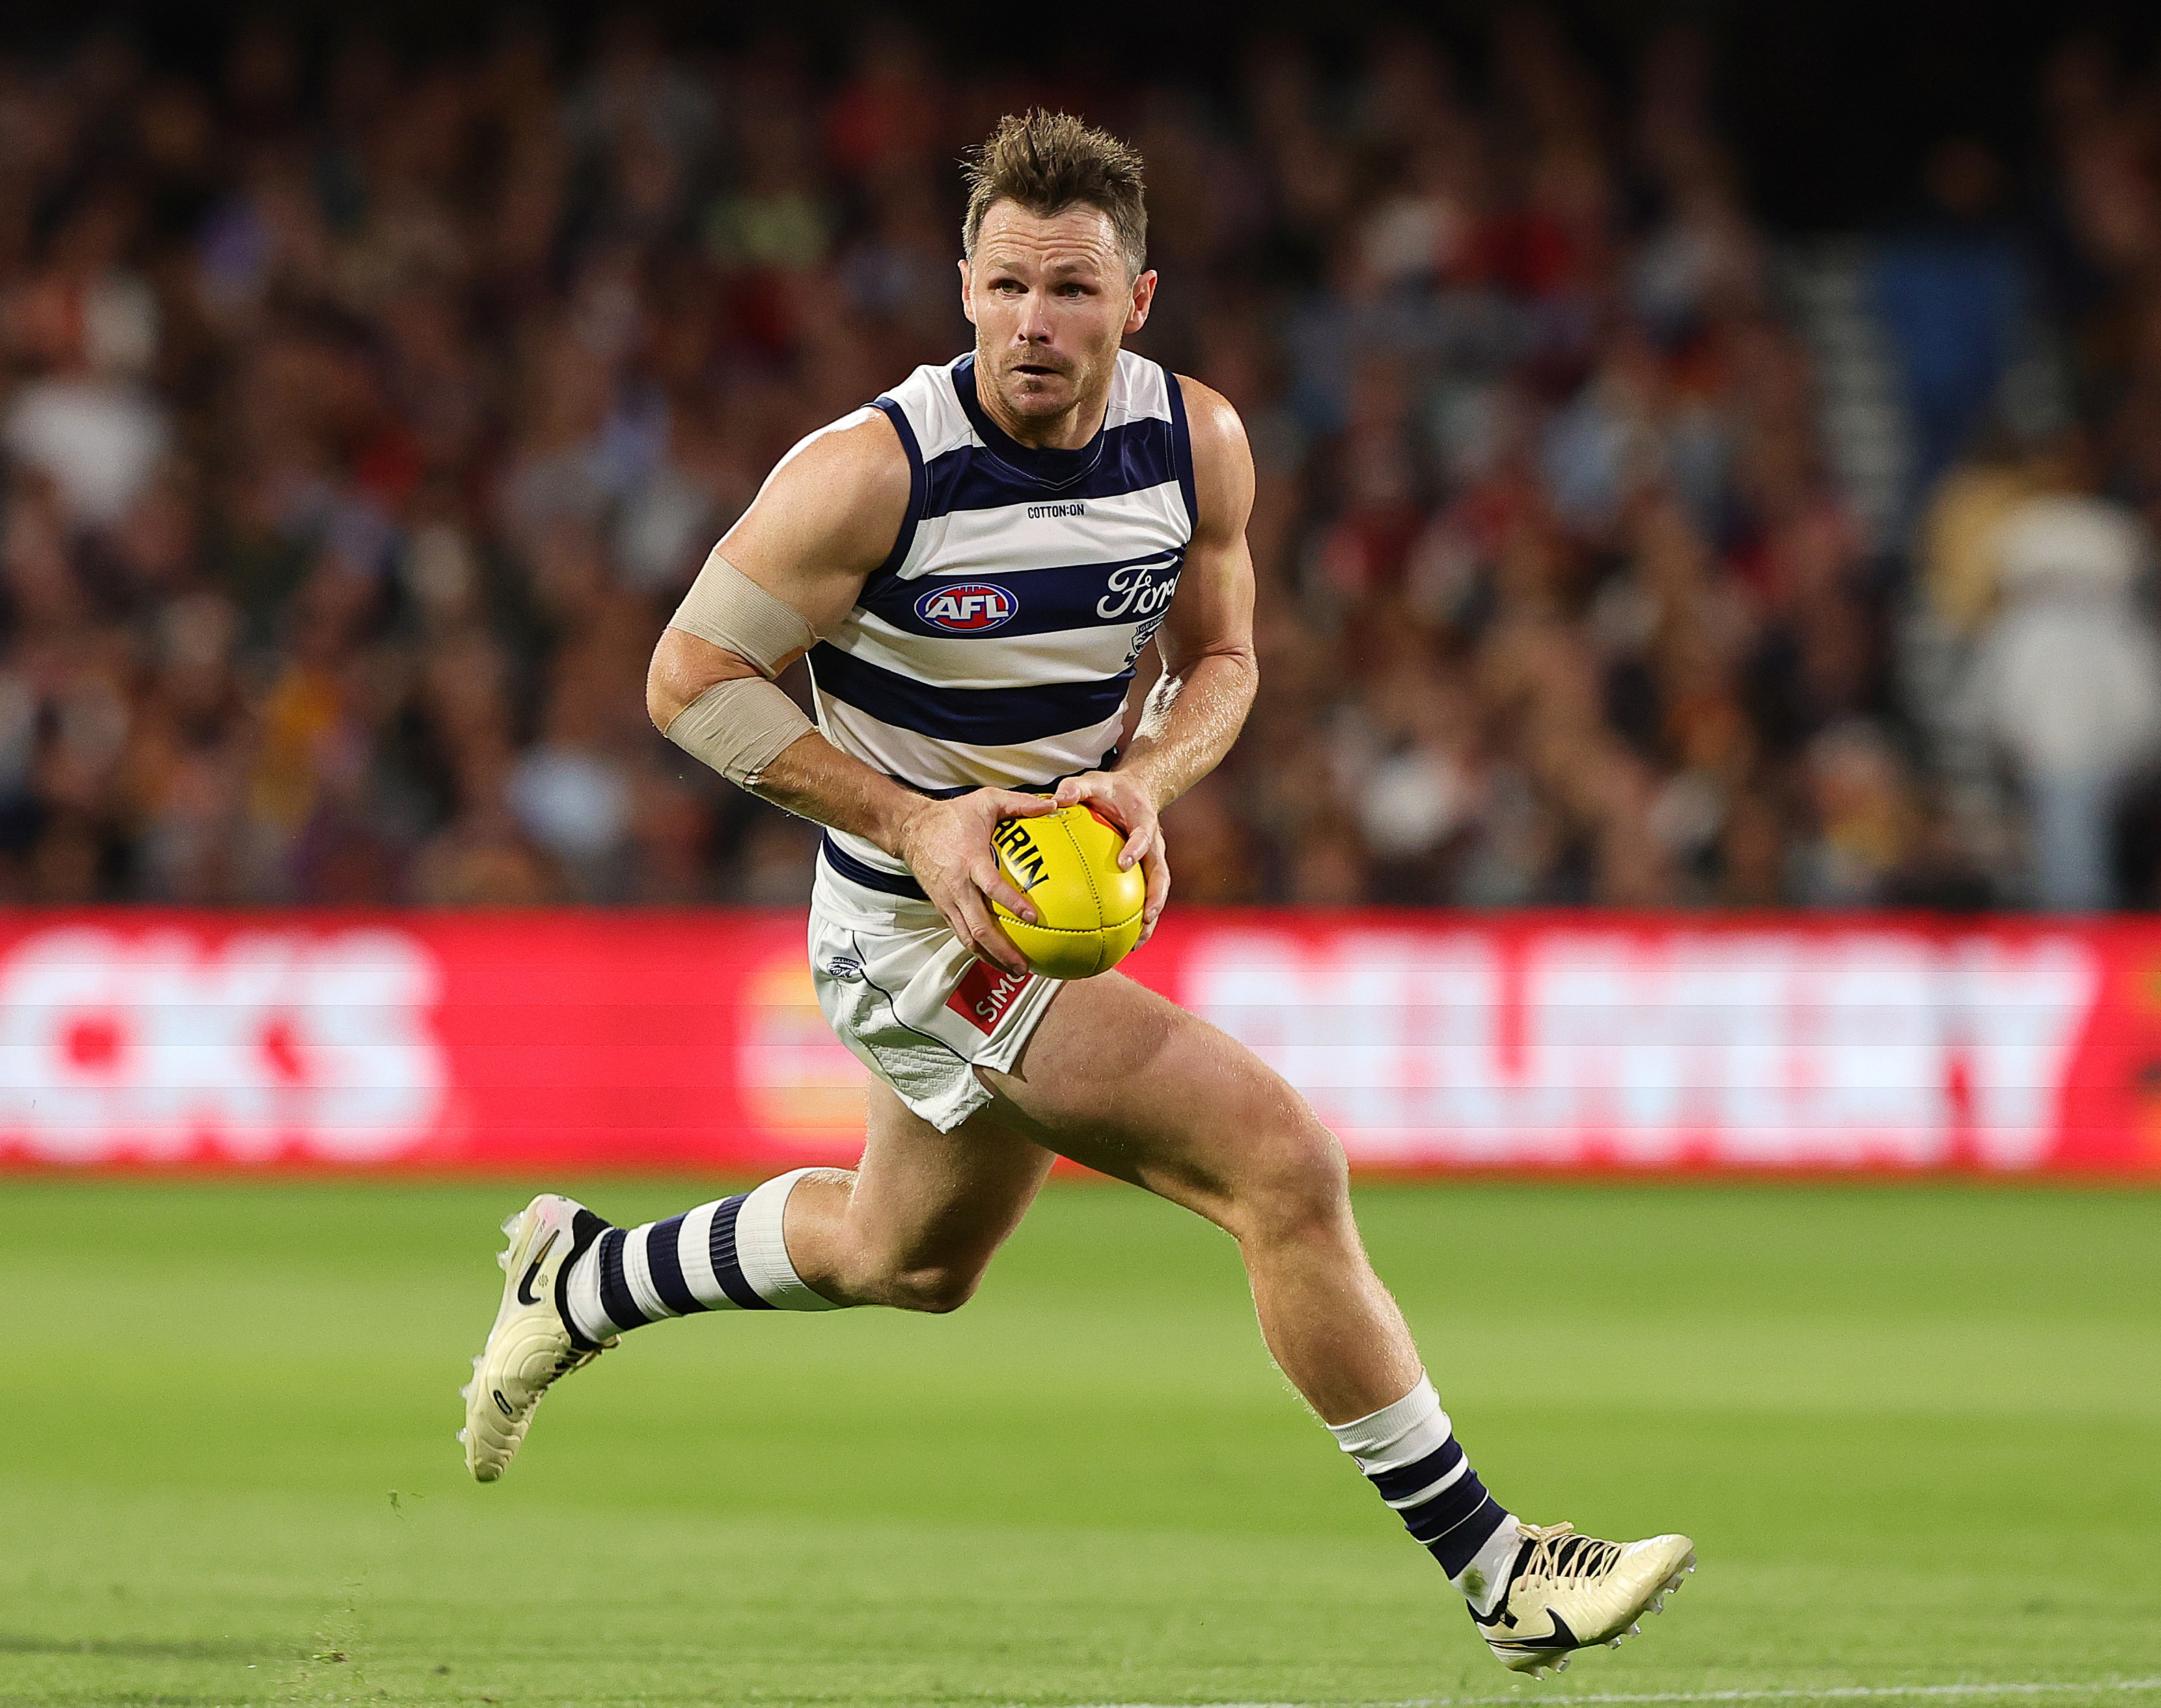 Patrick Dangerfield was subbed late due to a hamstring complaint.